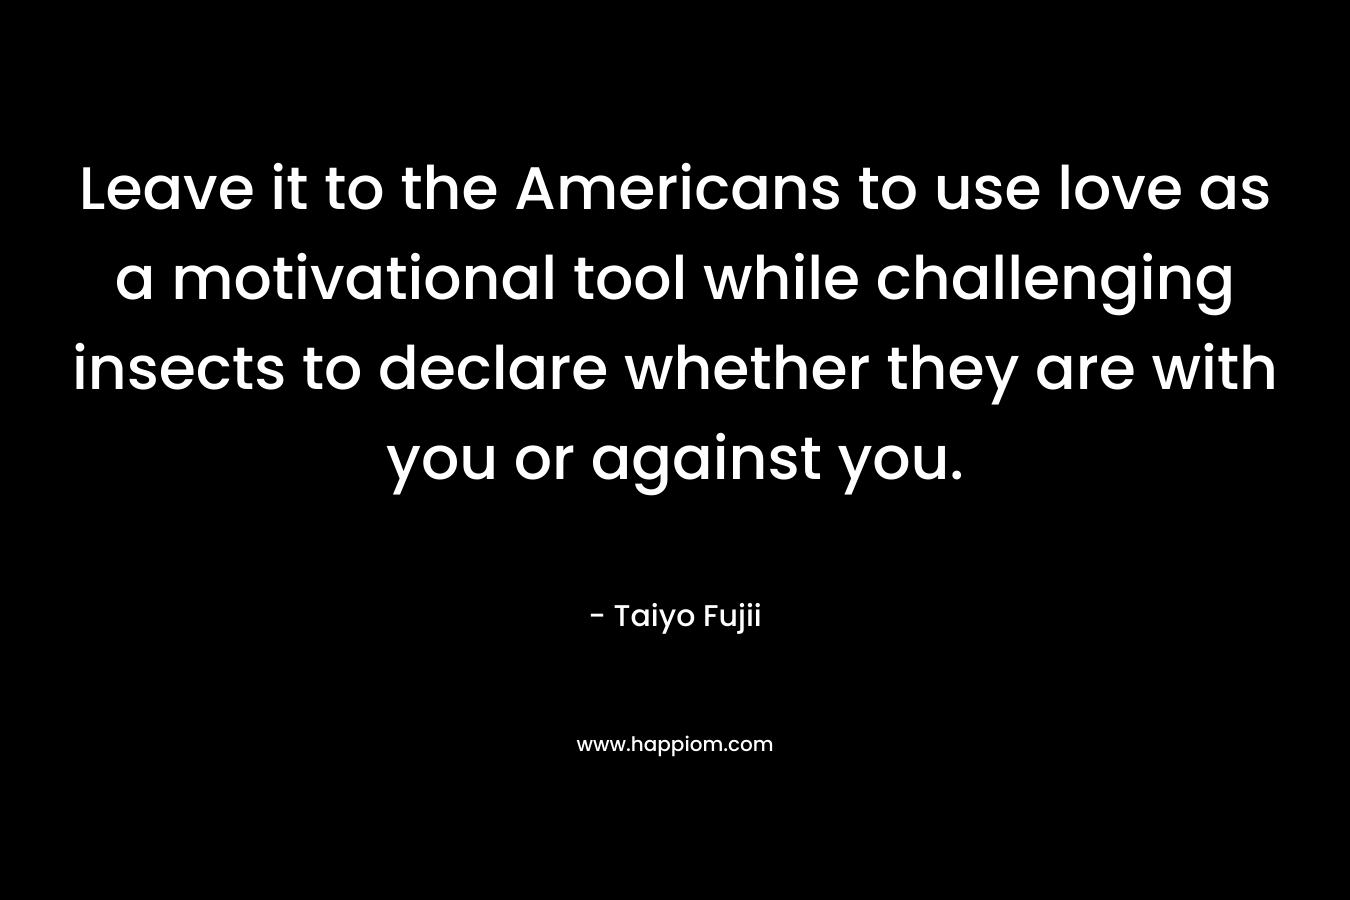 Leave it to the Americans to use love as a motivational tool while challenging insects to declare whether they are with you or against you. – Taiyo Fujii